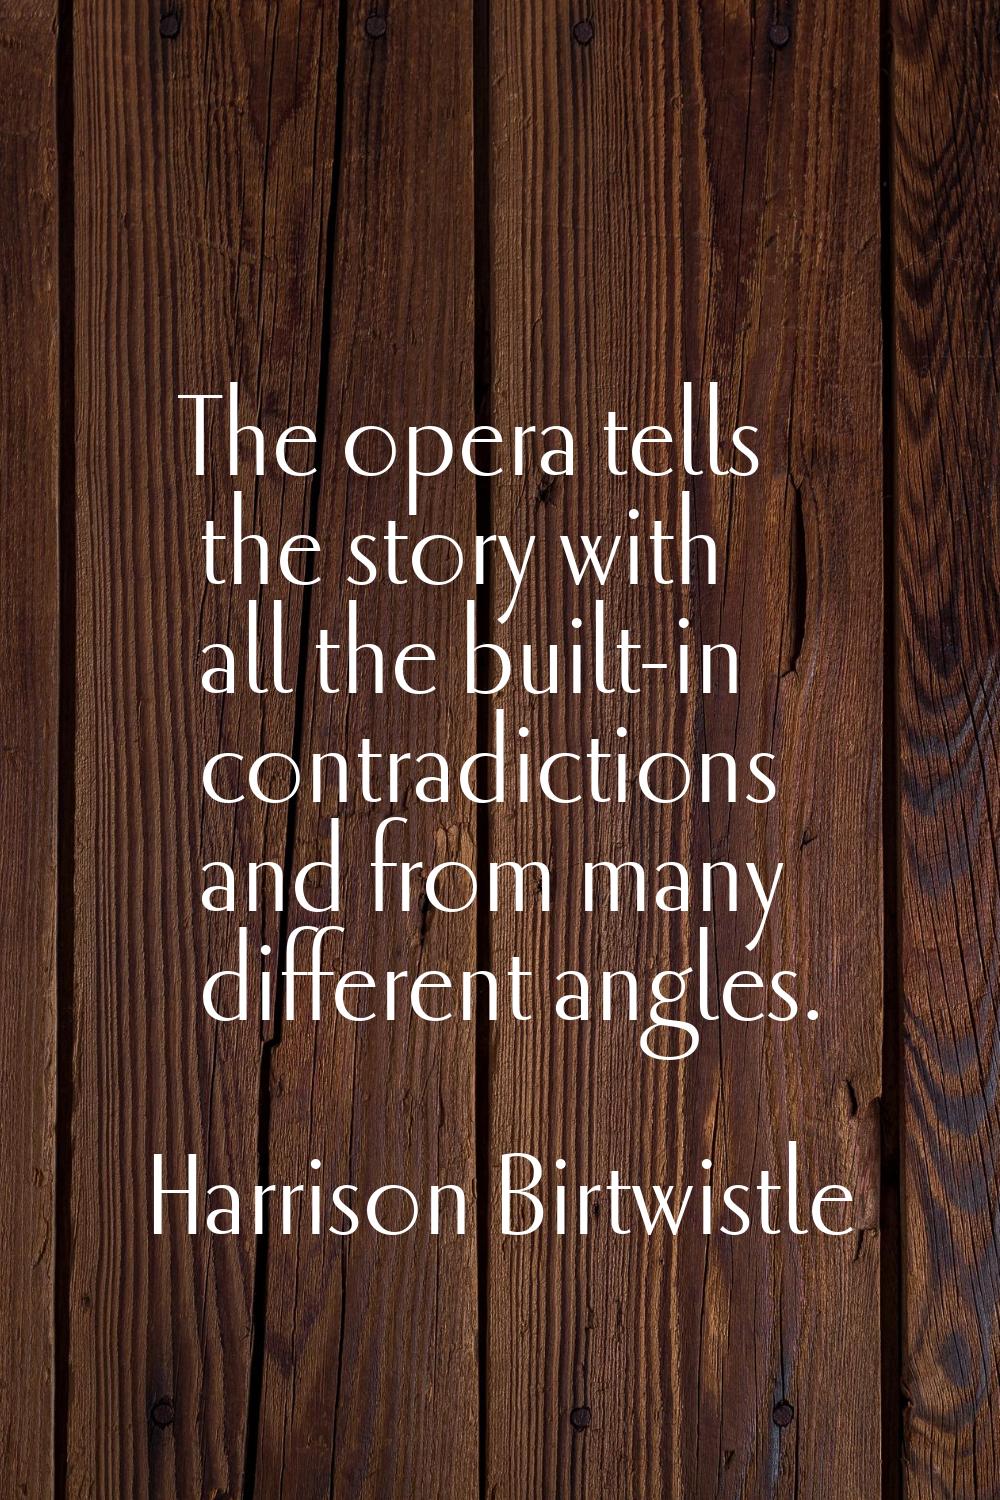 The opera tells the story with all the built-in contradictions and from many different angles.